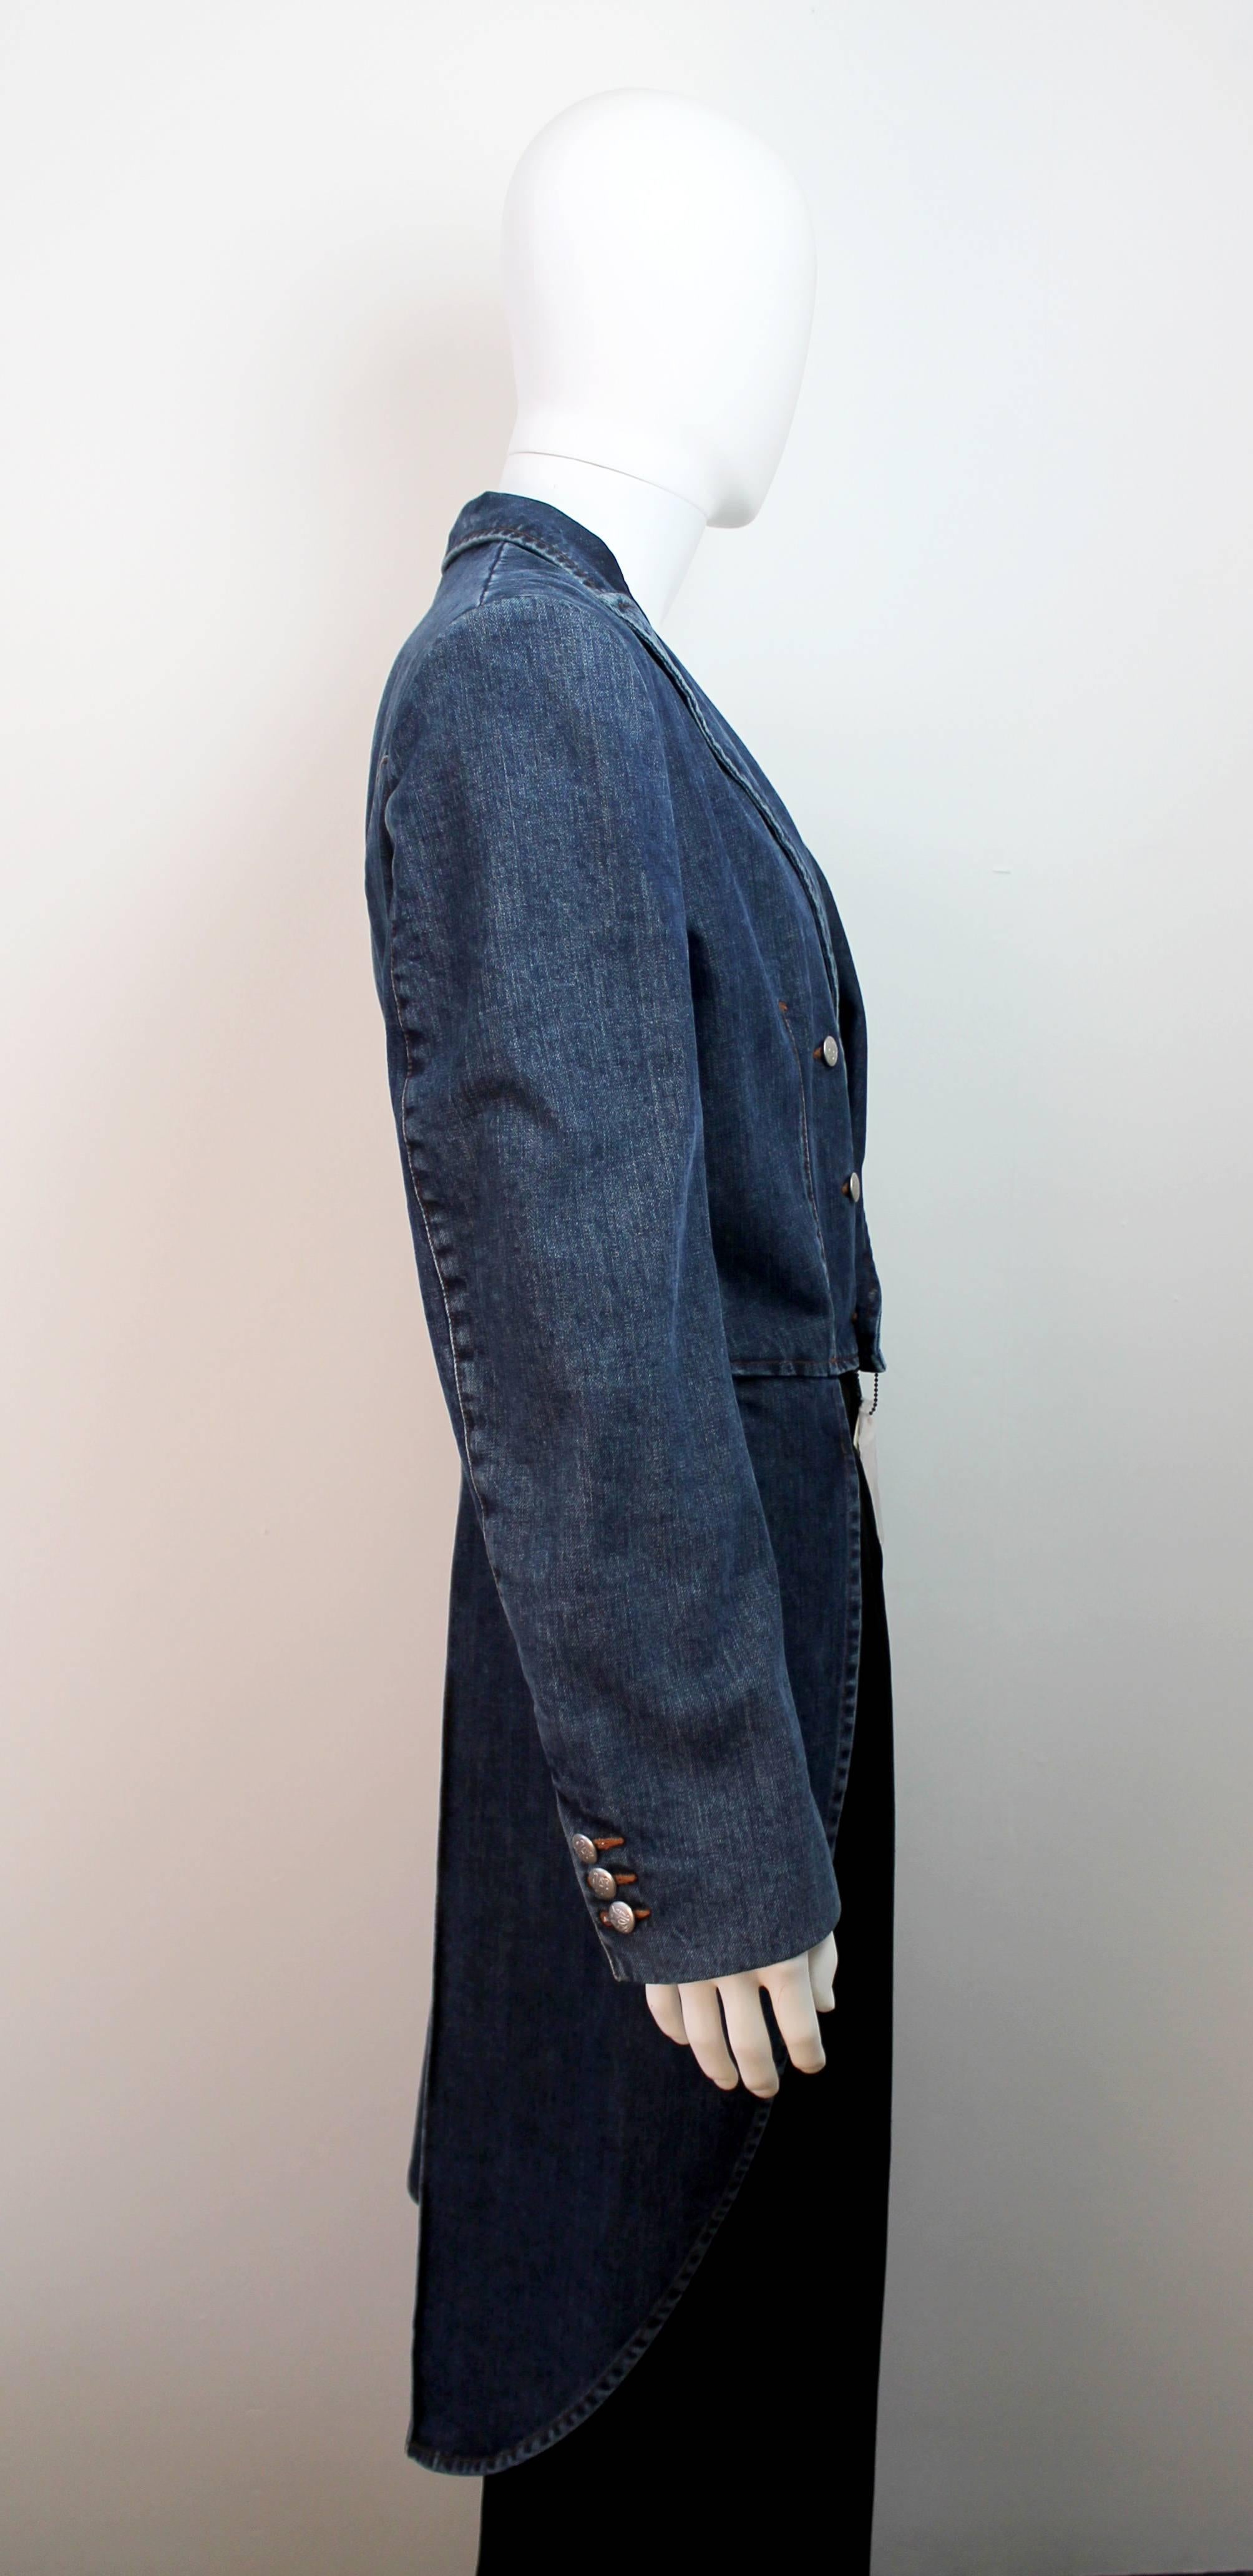 Fantastic denim tailcoat by Jean Paul Gaultier Jeans. The front is double breasted with silver metal buttons and the back has exaggerated long tails that hang down to behind the knee. The coat is brand new with tags and has never been worn.
